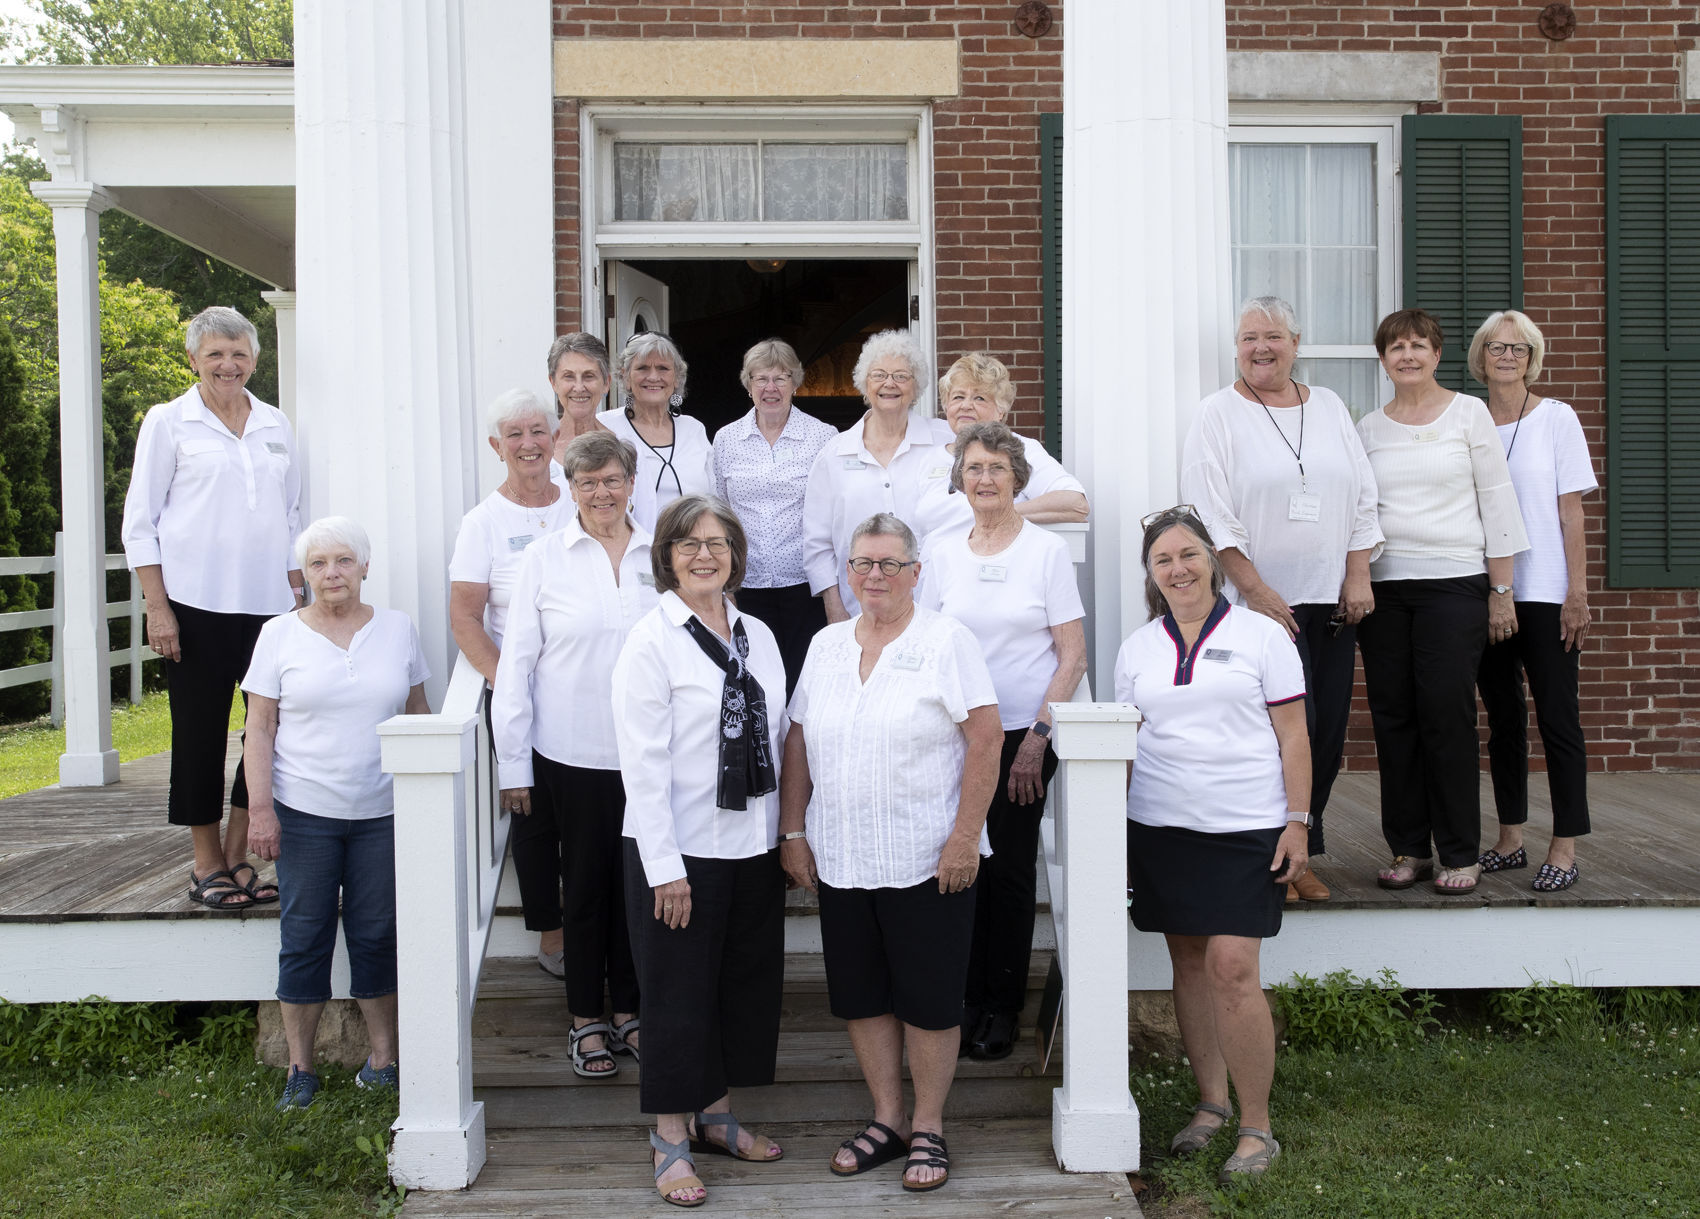 The docents in front of the Washburne House in Galena, Ill., on Wedneday, June 30, 2021.    PHOTO CREDIT: Stephen Gassman